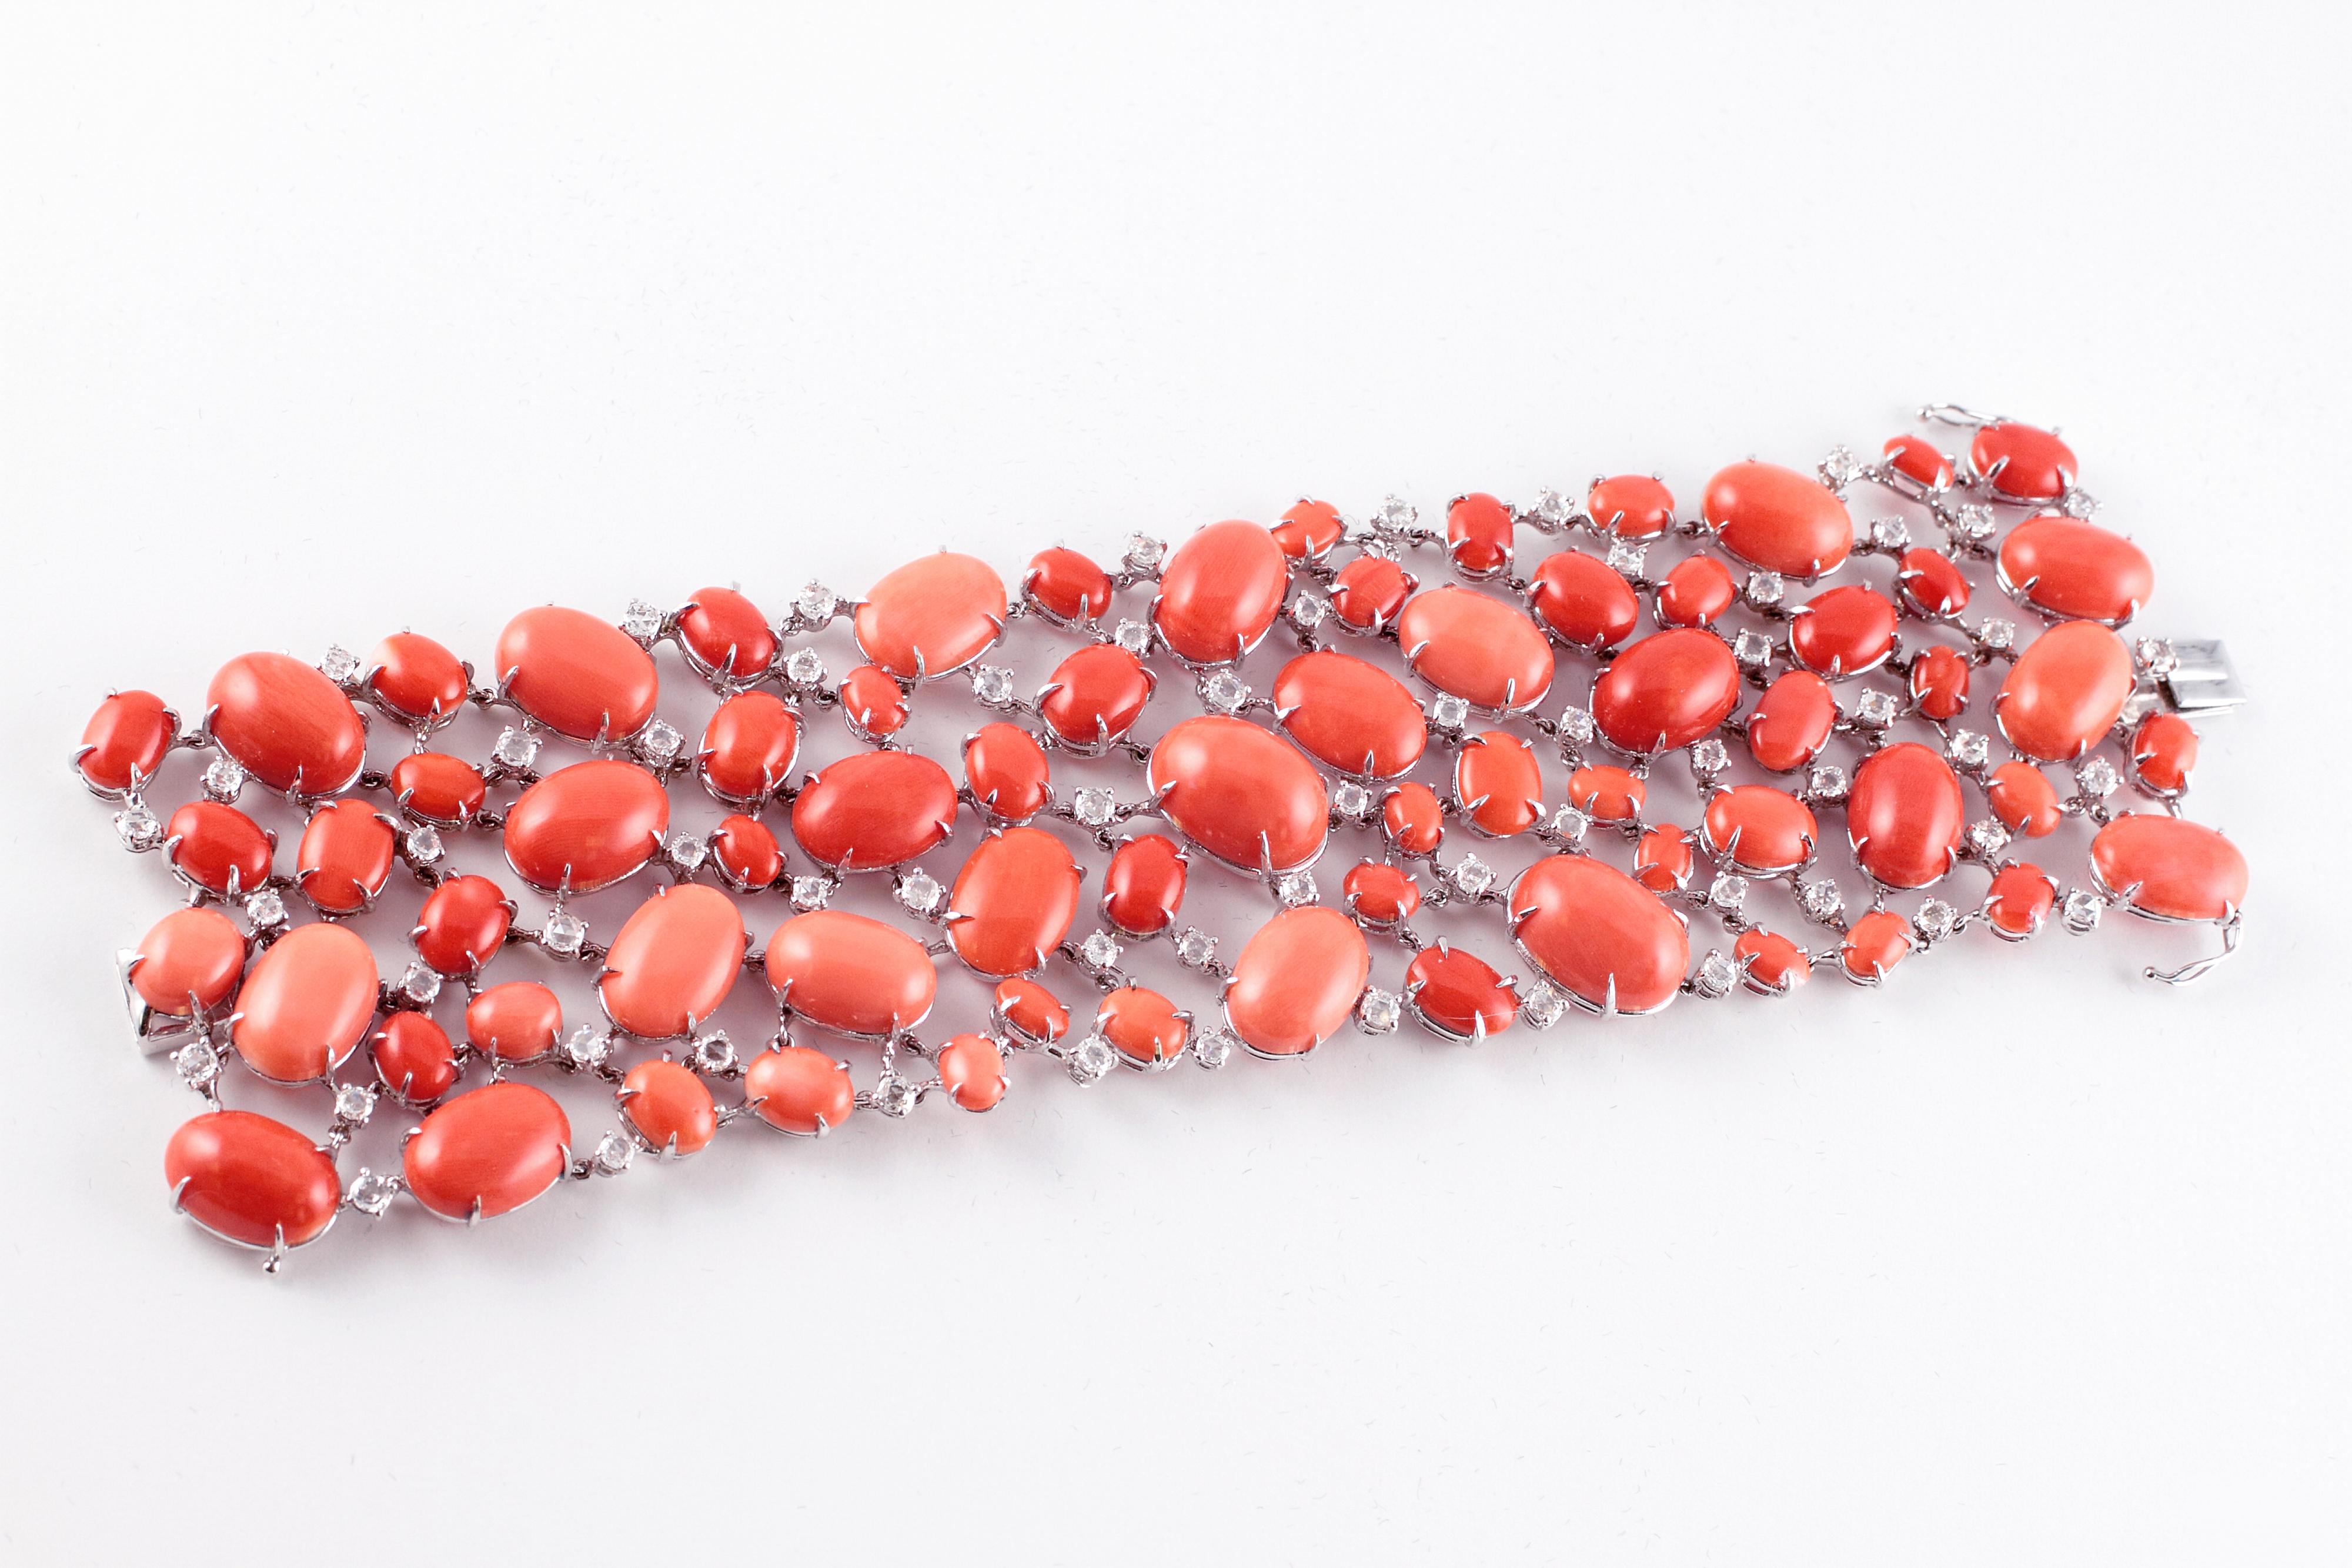 Lovely cabochon-cut coral stones in various shades alternating with rose-cut diamonds makes this bracelet a show stopper! It measures 7 inches in length x 2 inches in width and is as light as a feather on your wrist.  The 2008 Neiman Marcus receipt